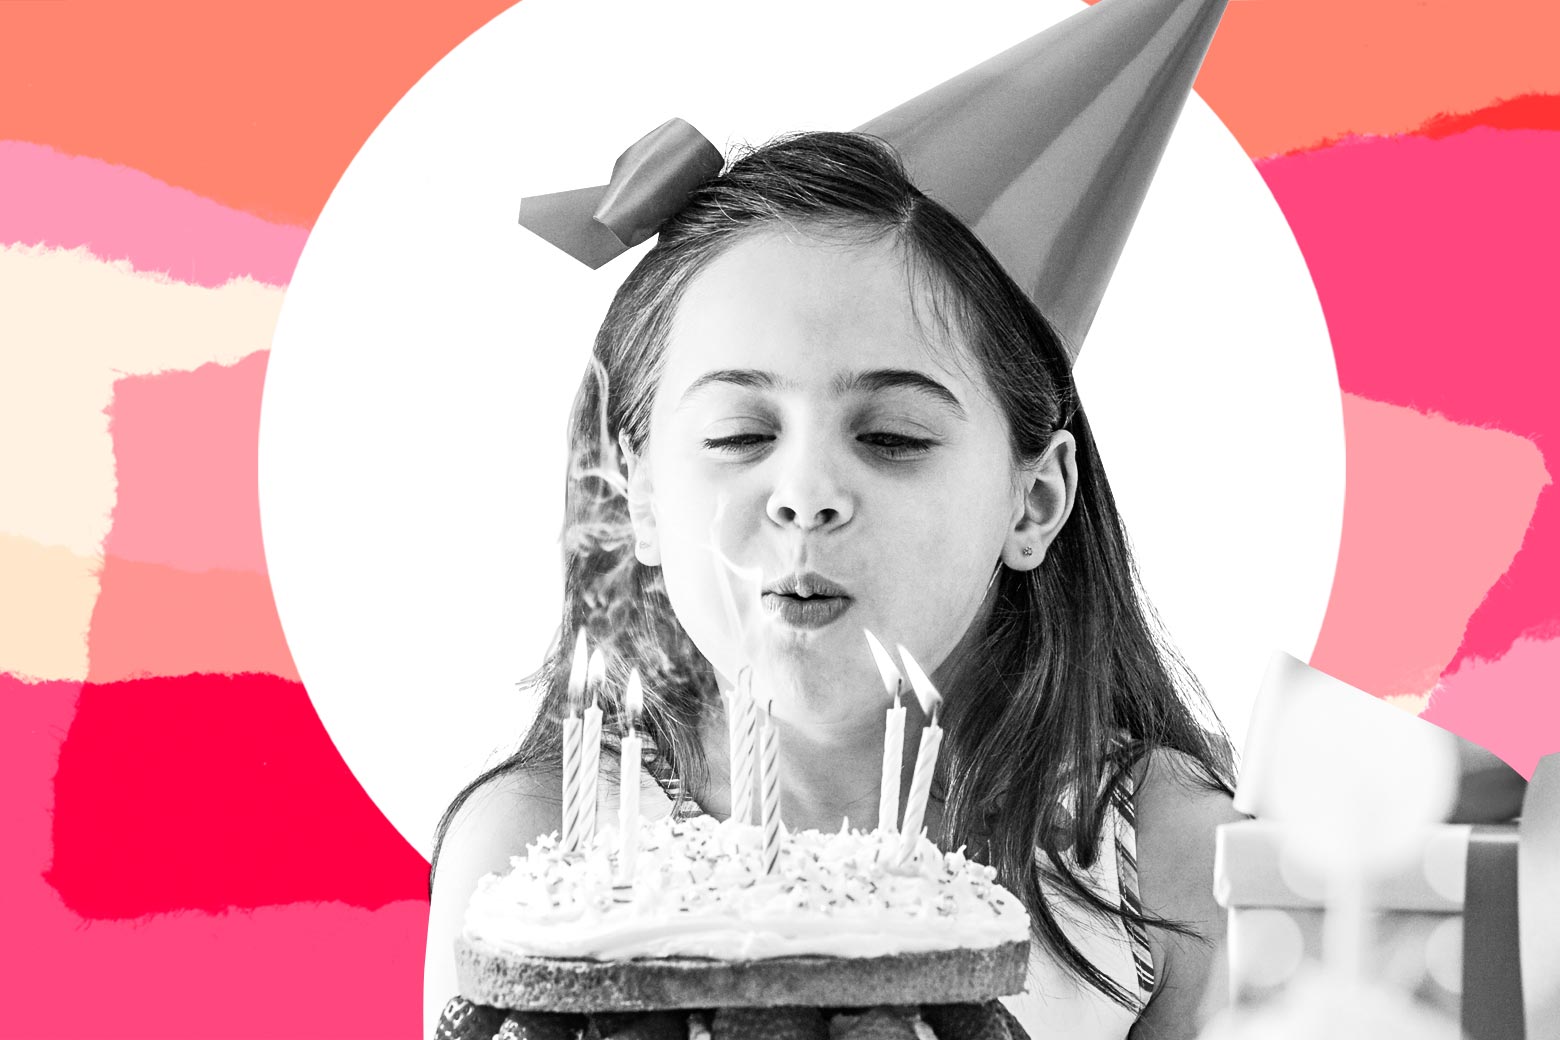 A girl in a party hat blows out candles on a cake.